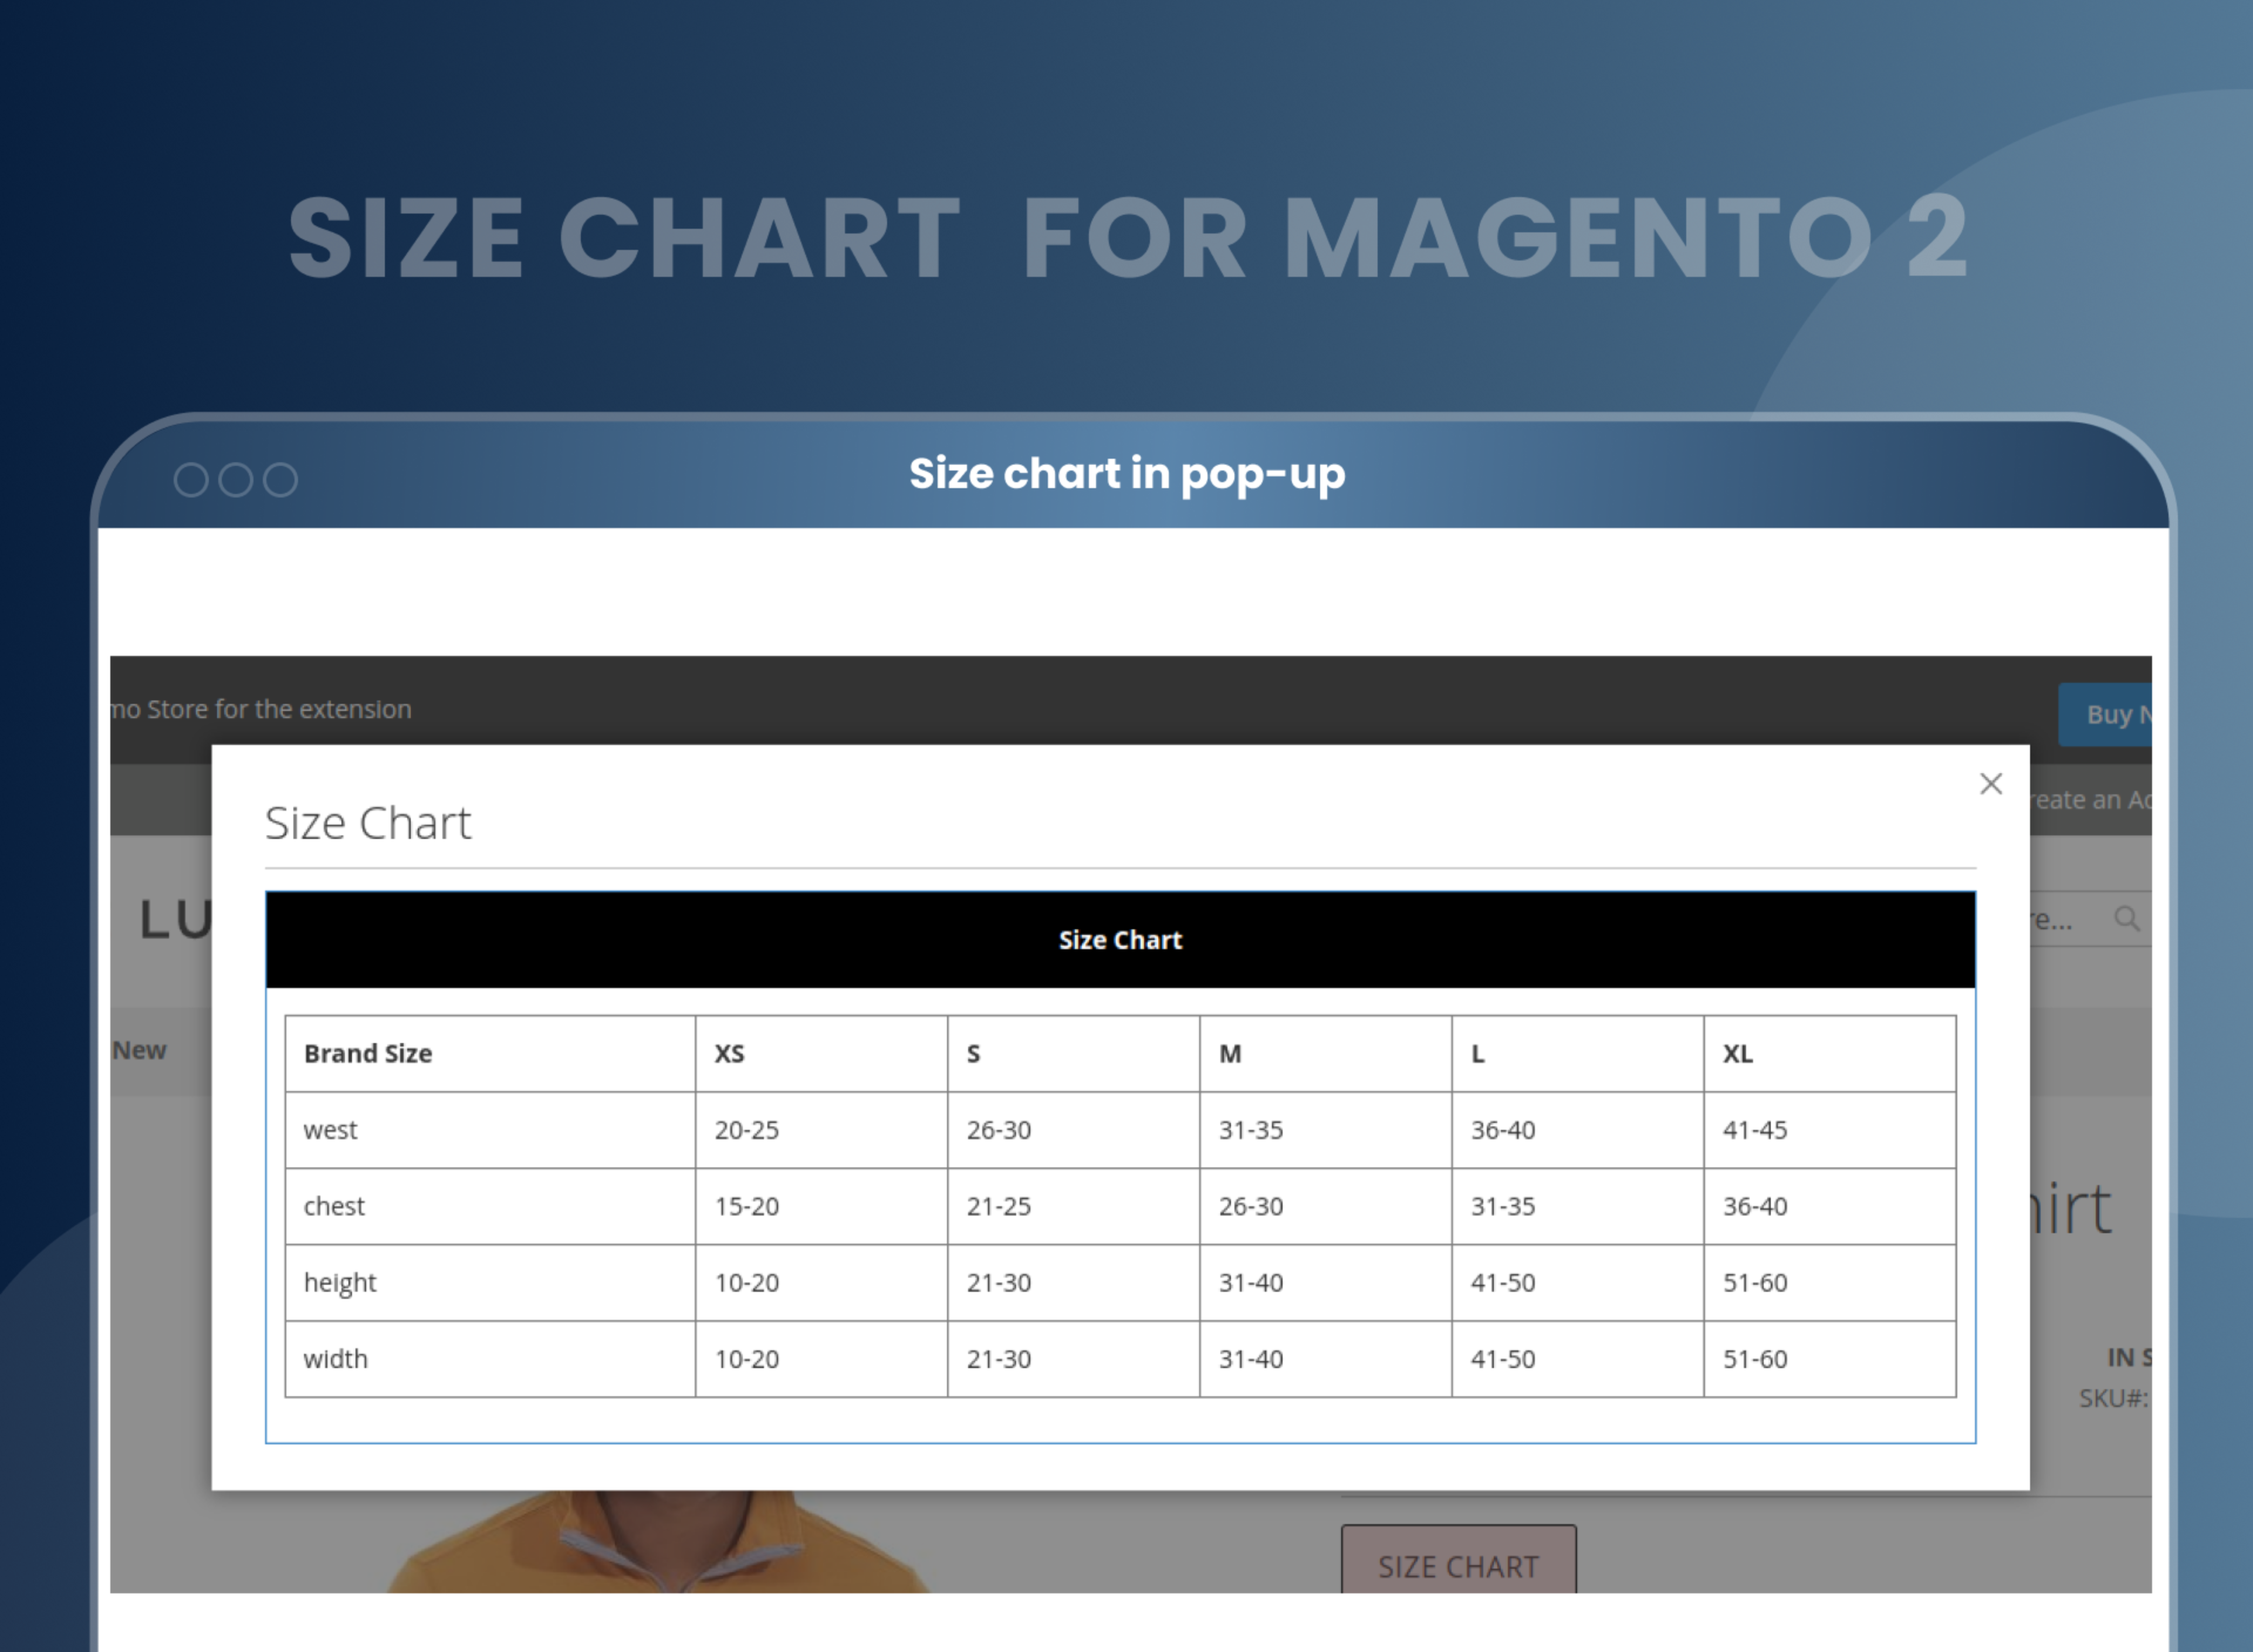  Size chart in pop-up